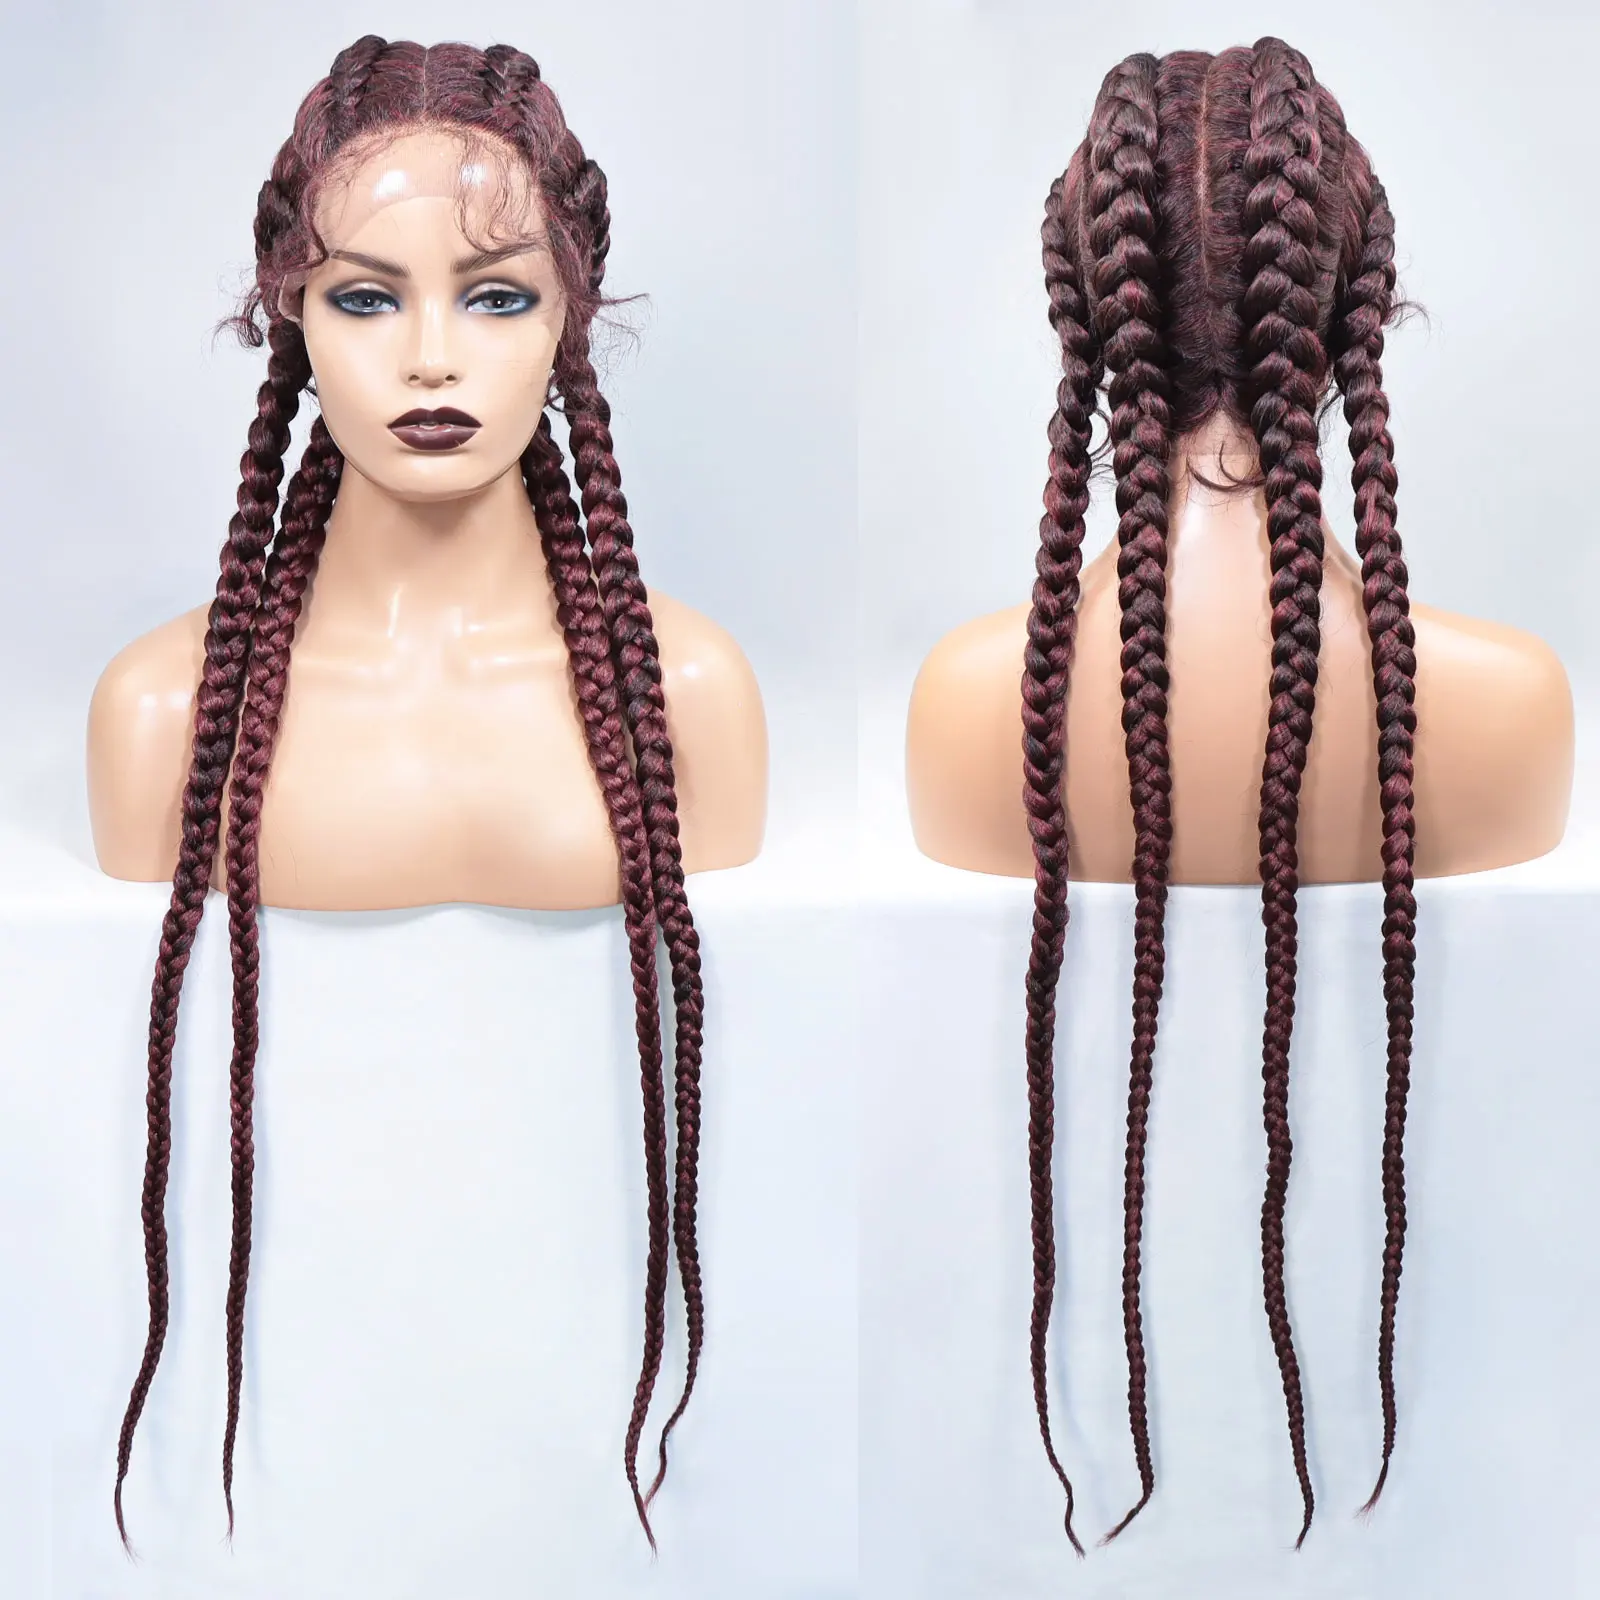 Synthetic Dutch Braids Wigs With Baby Hair African American Burgundy Lace Wig 4 Long Box Braided 360 Lace Wigs For Black Women